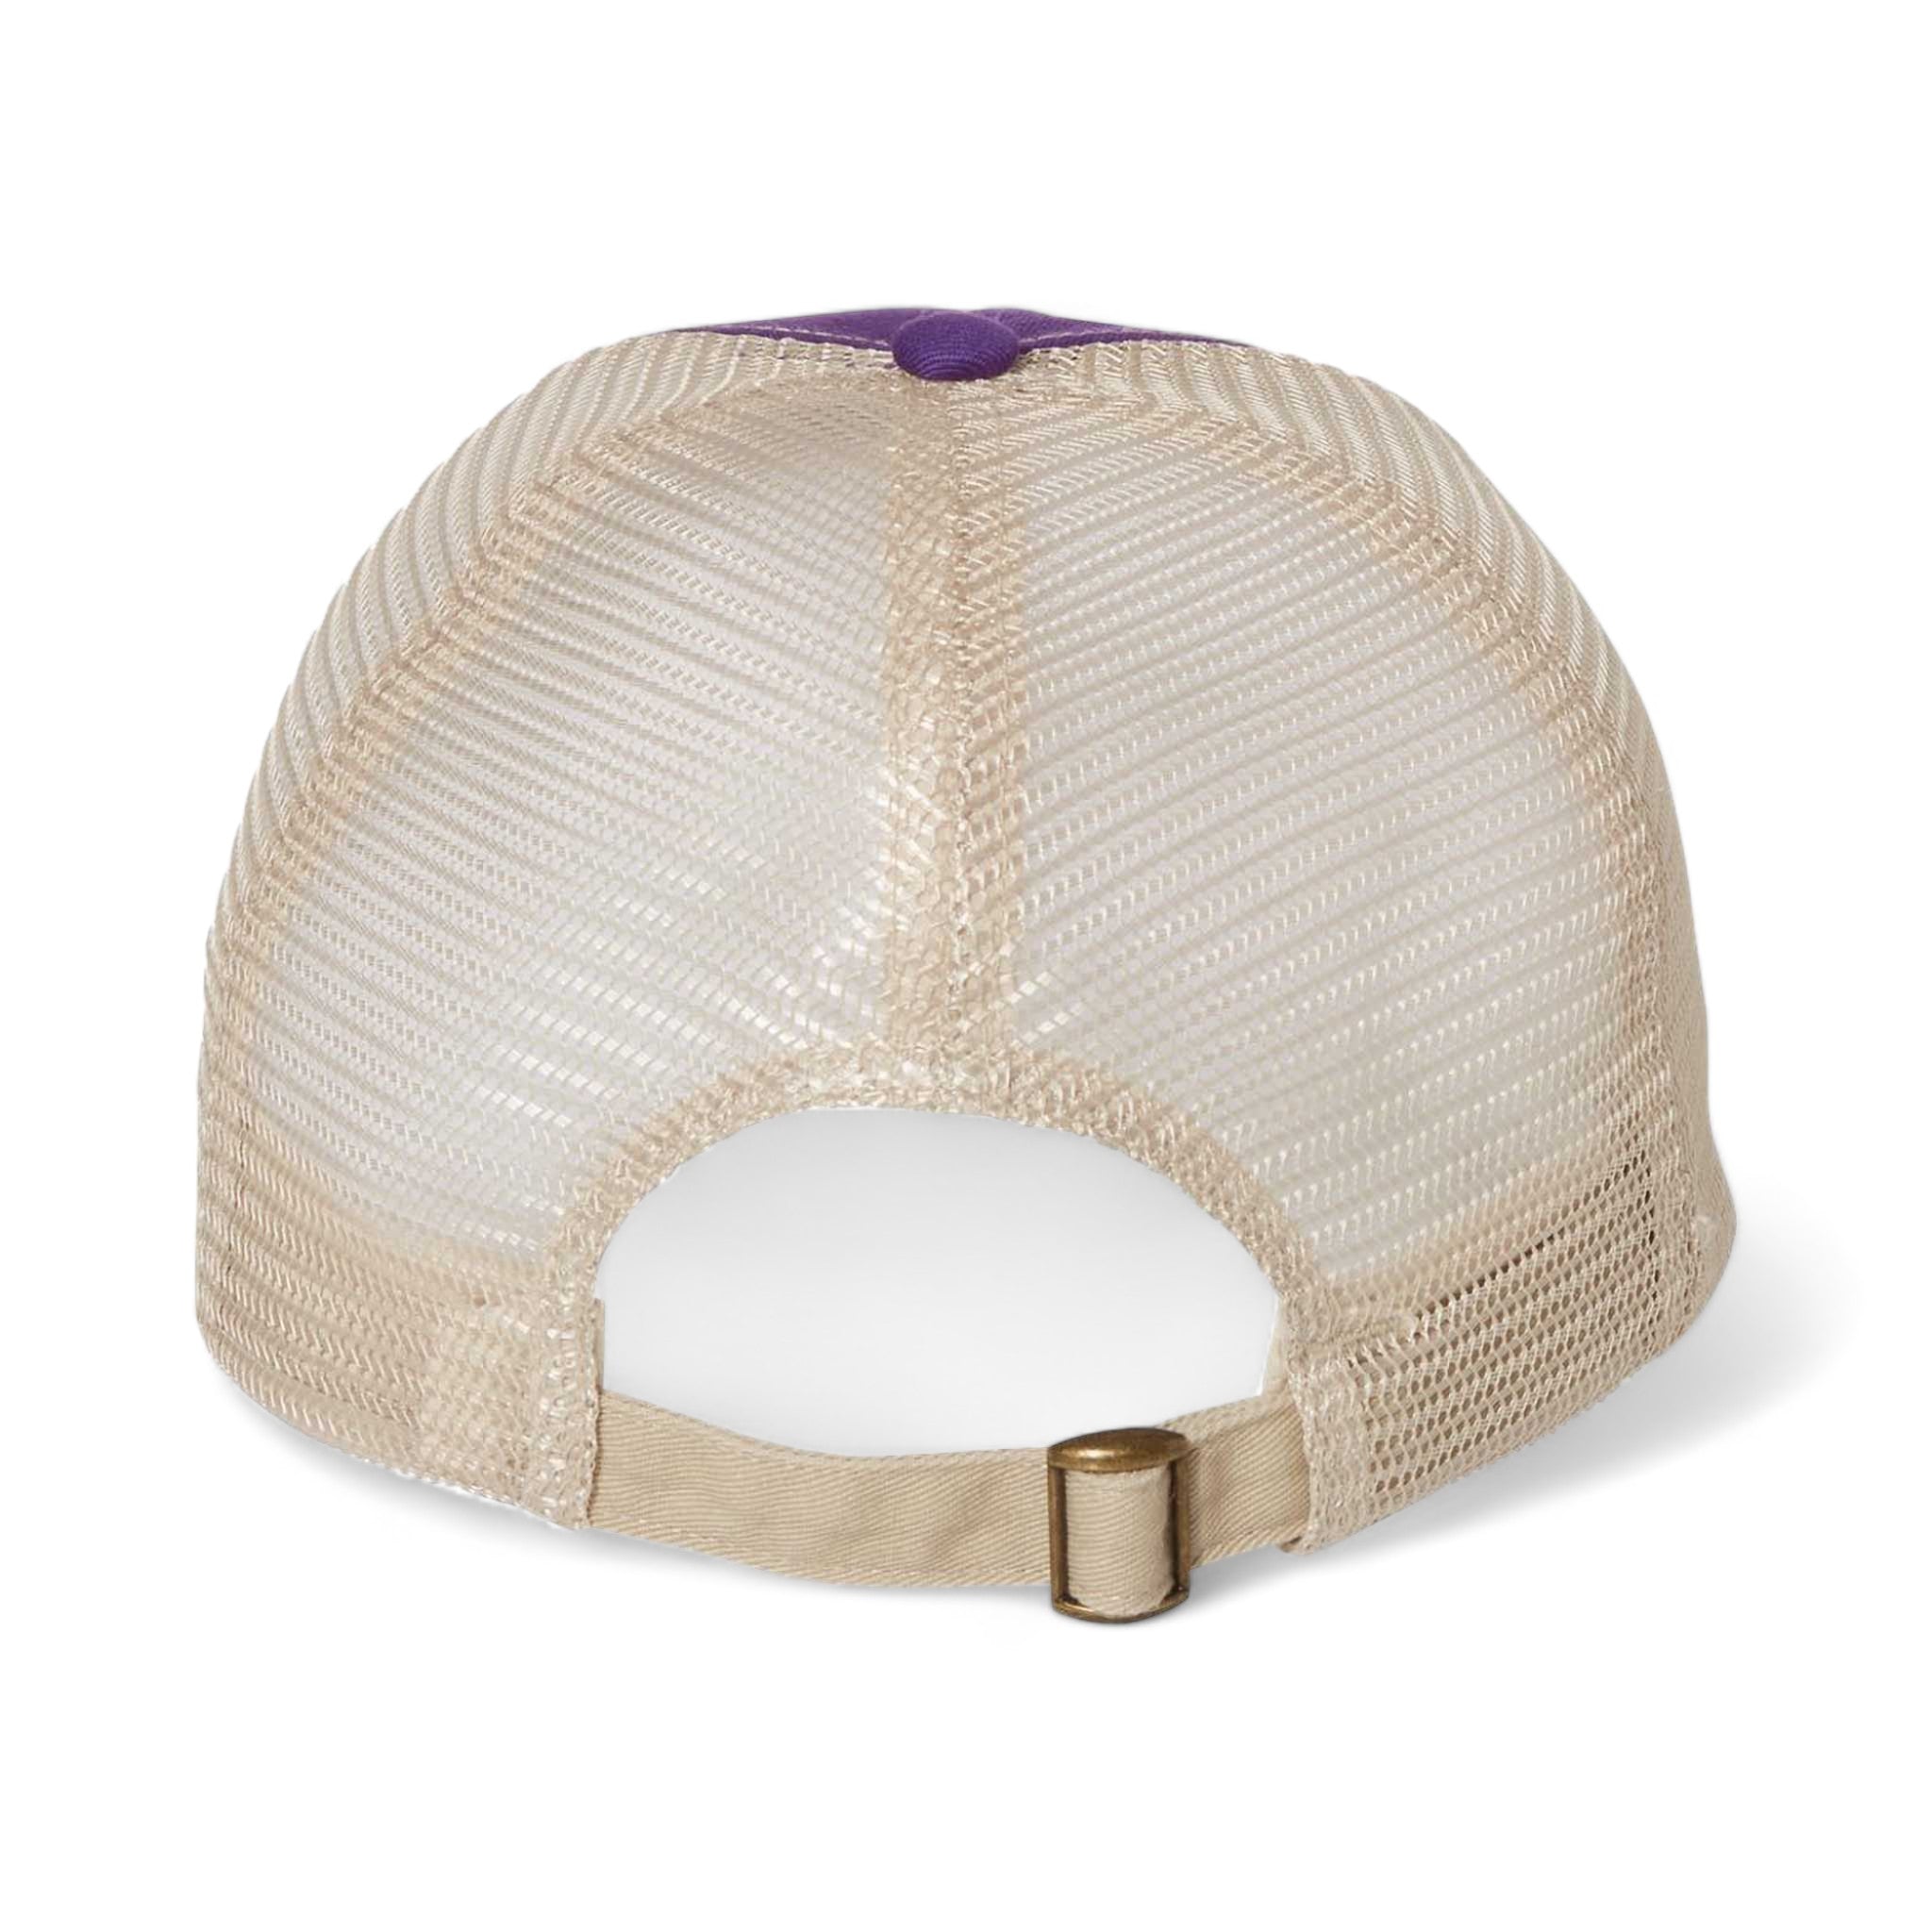 Back view of Sportsman 3100 custom hat in purple and stone